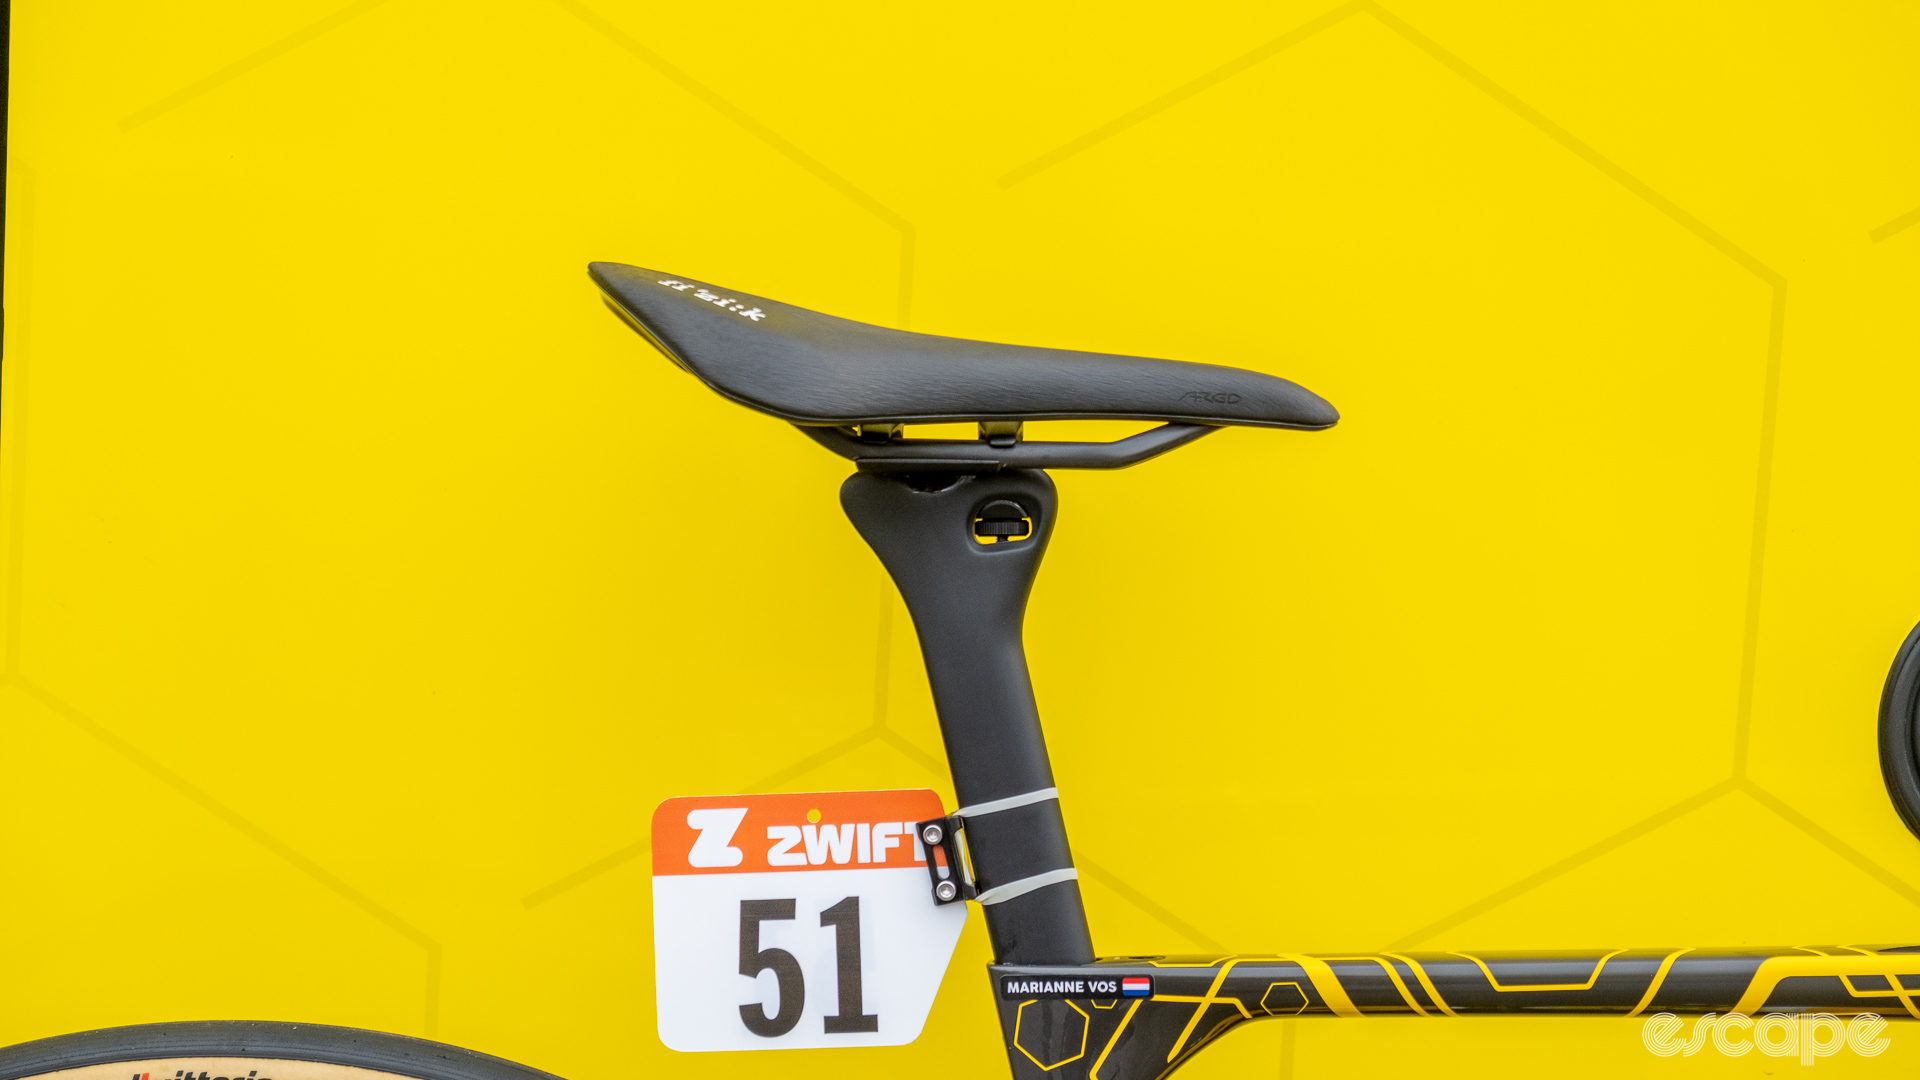 The image shows the saddle on Marianne Vos' Cervelo Soloist.